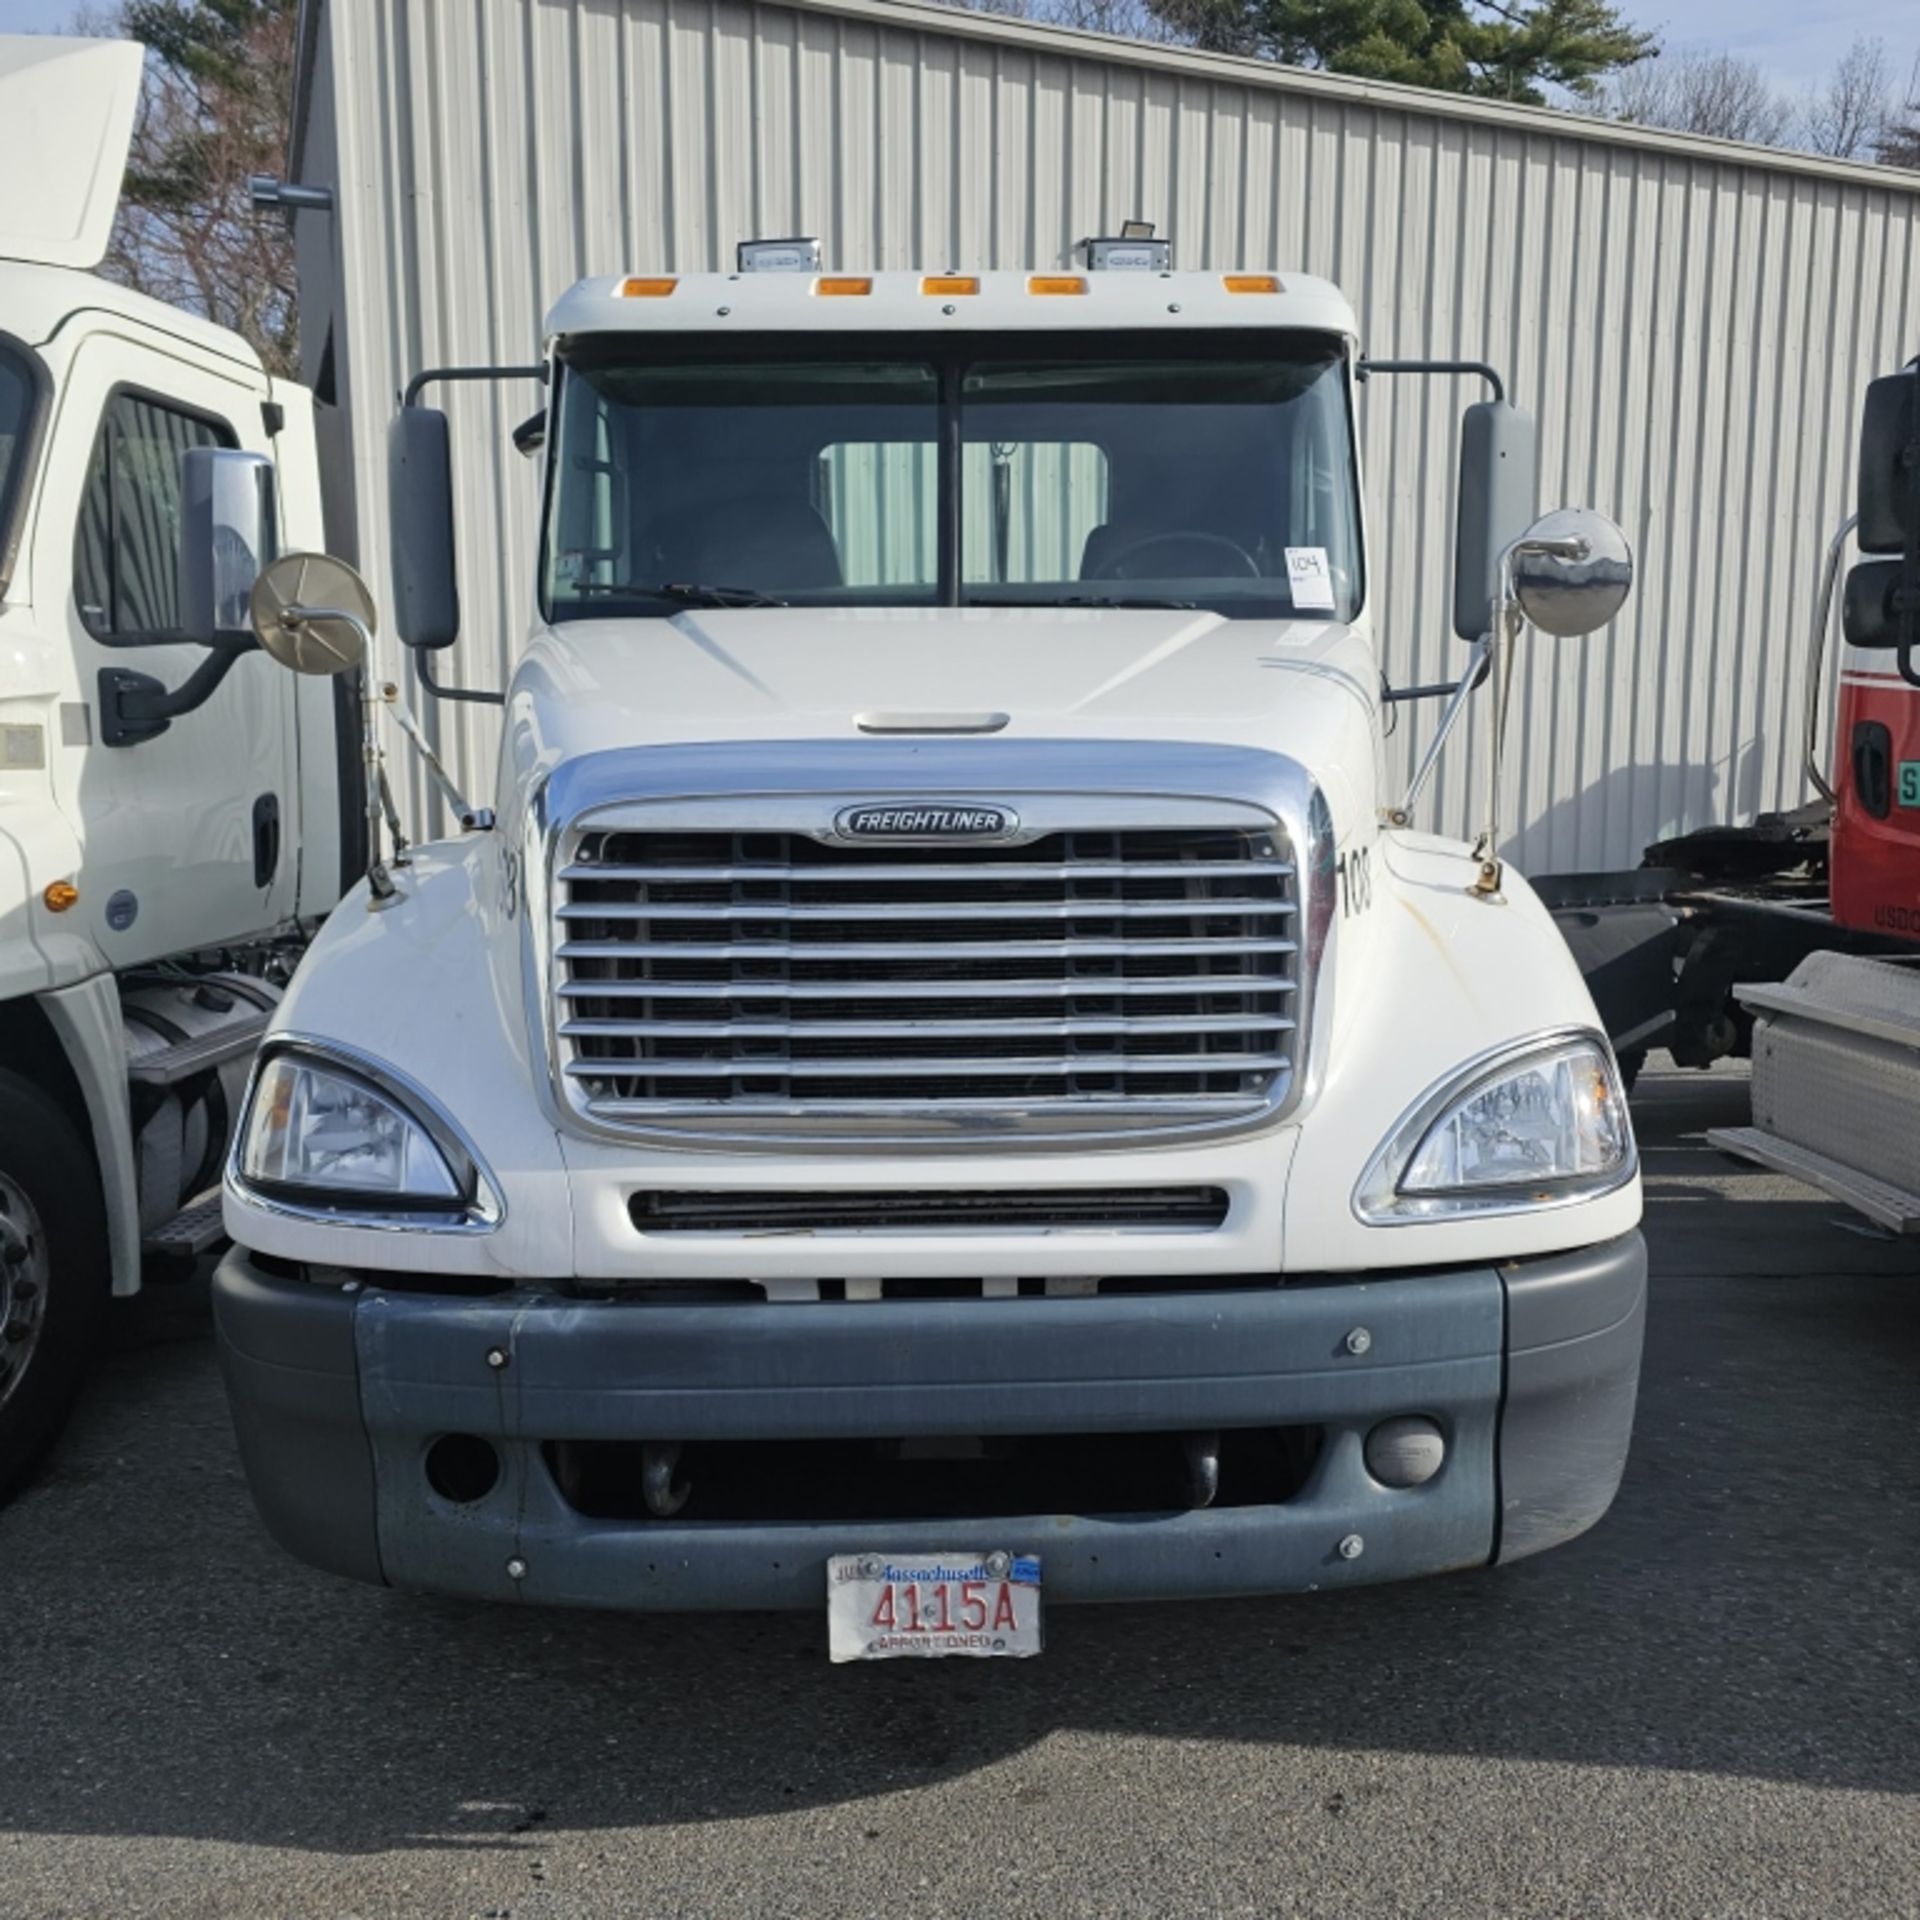 2005 Freightliner Columbia - Image 2 of 10